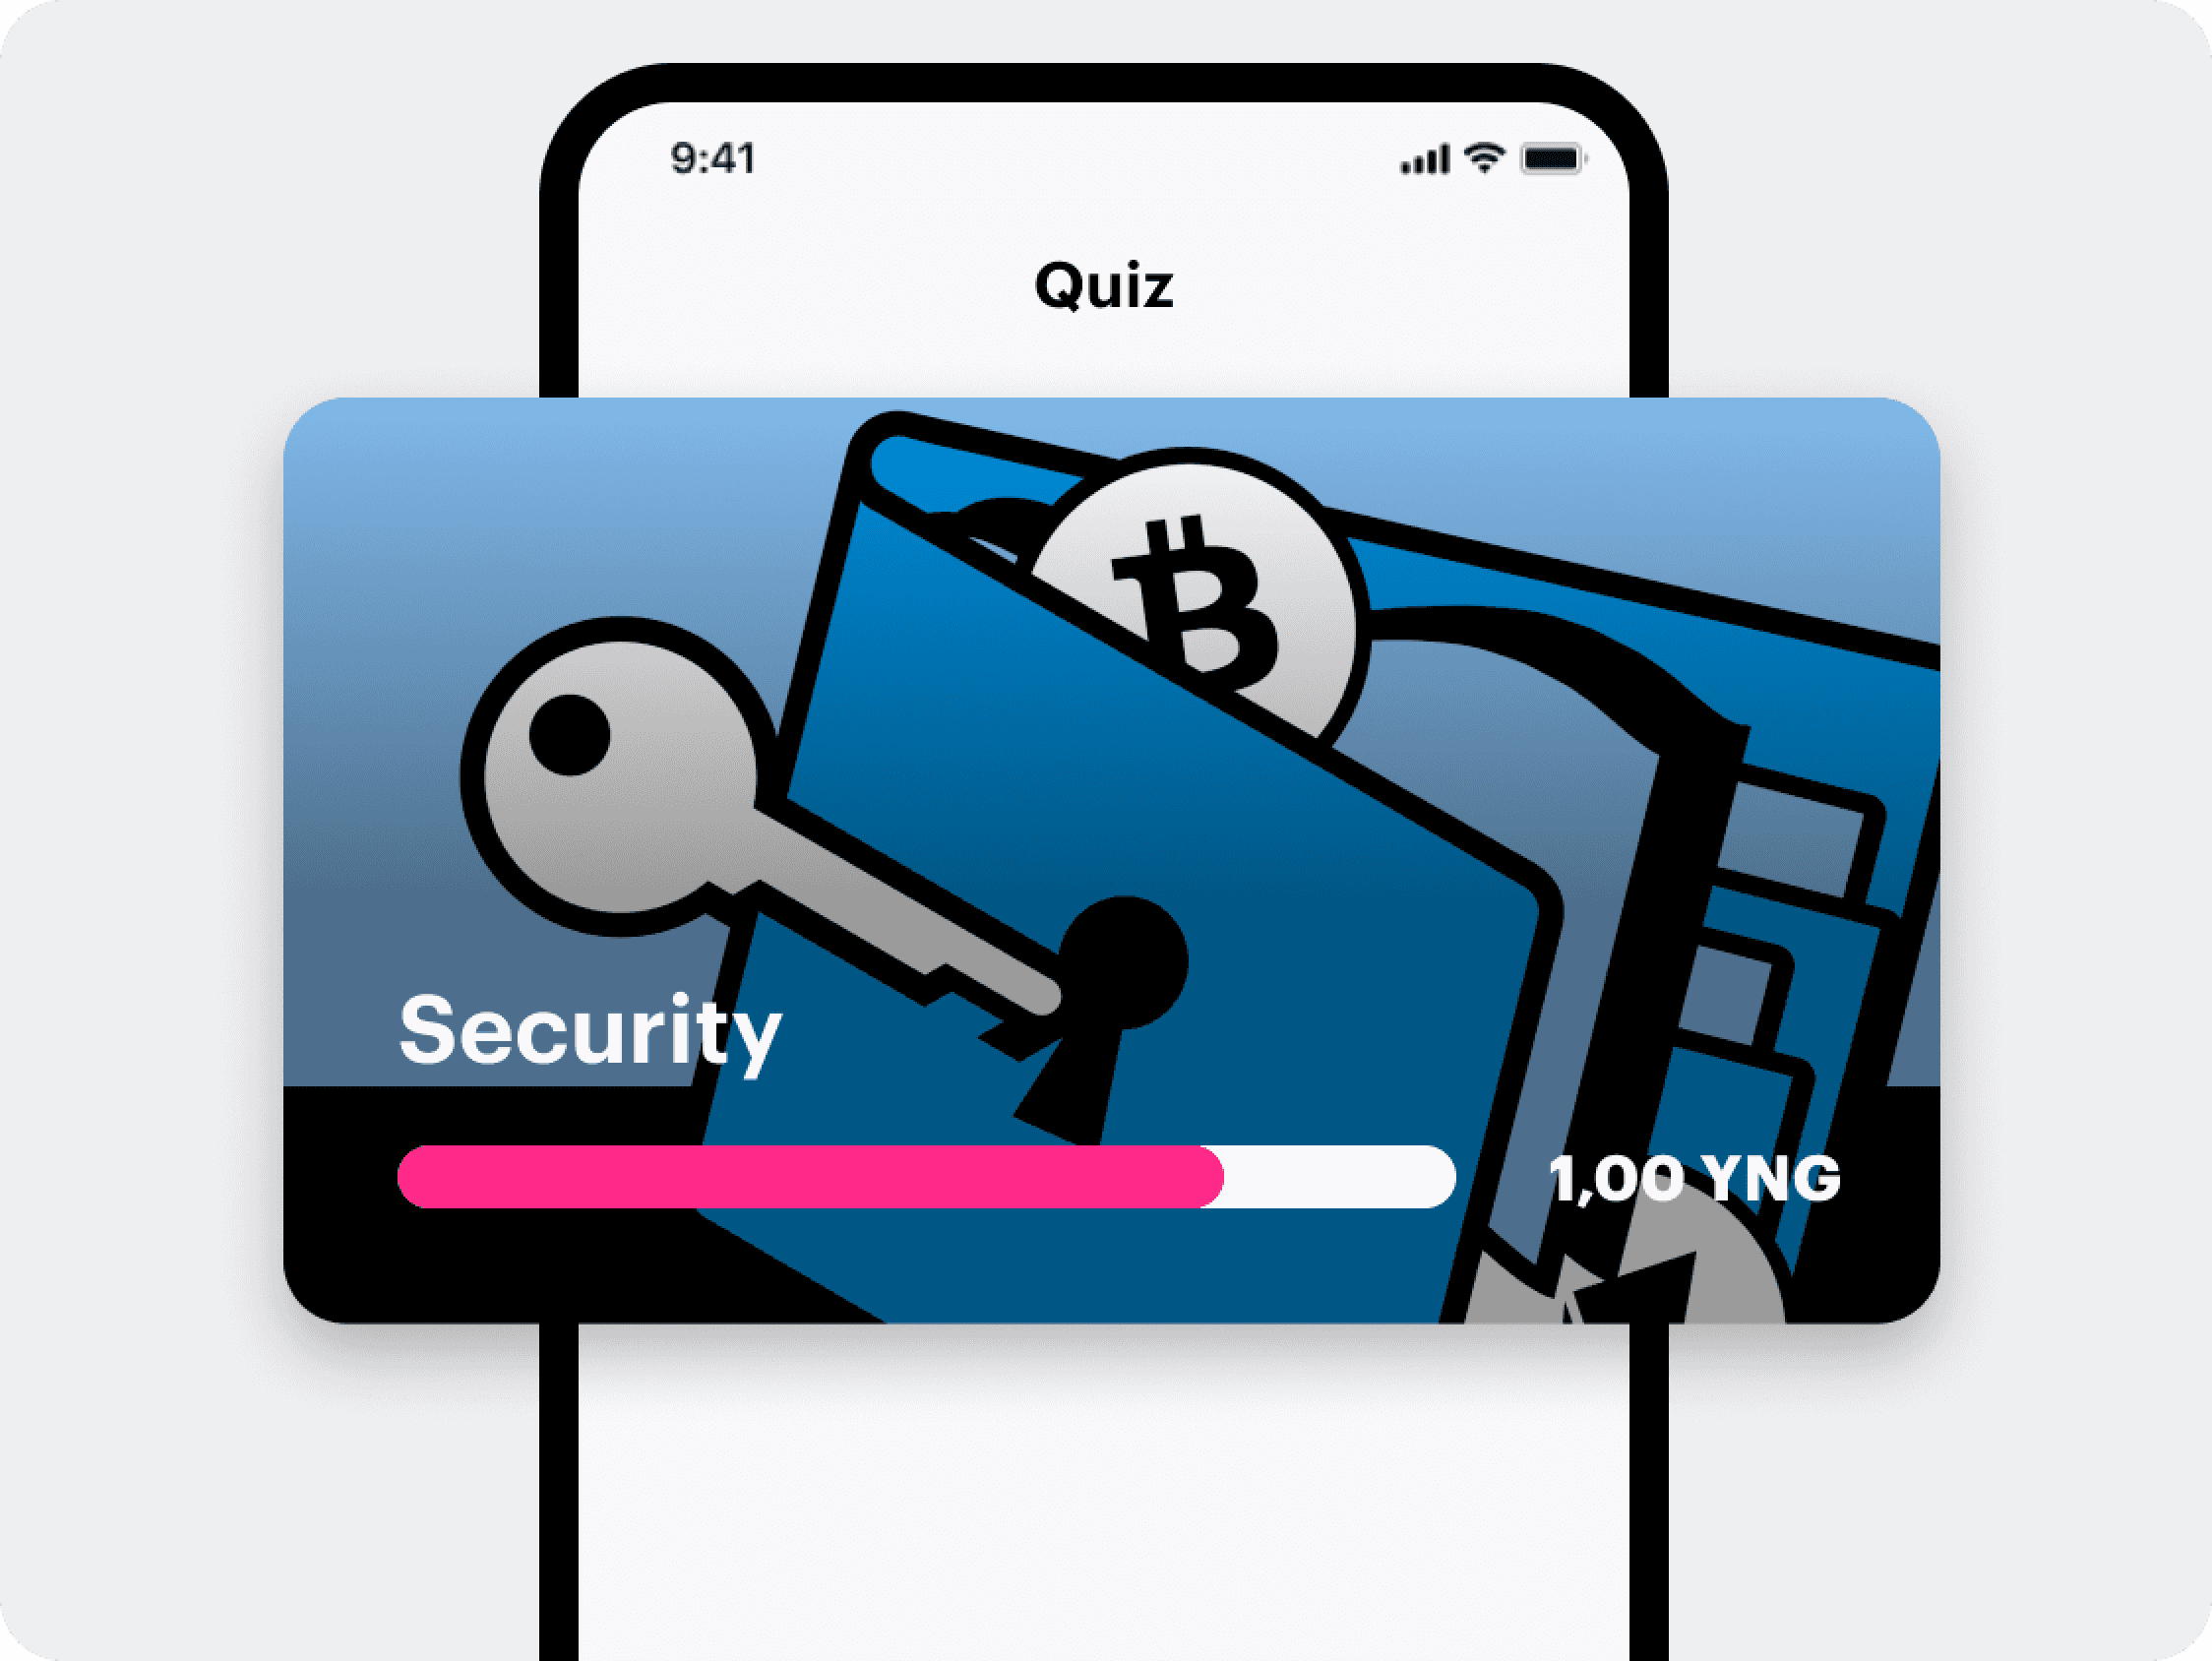 Walk and earn with Quizzes